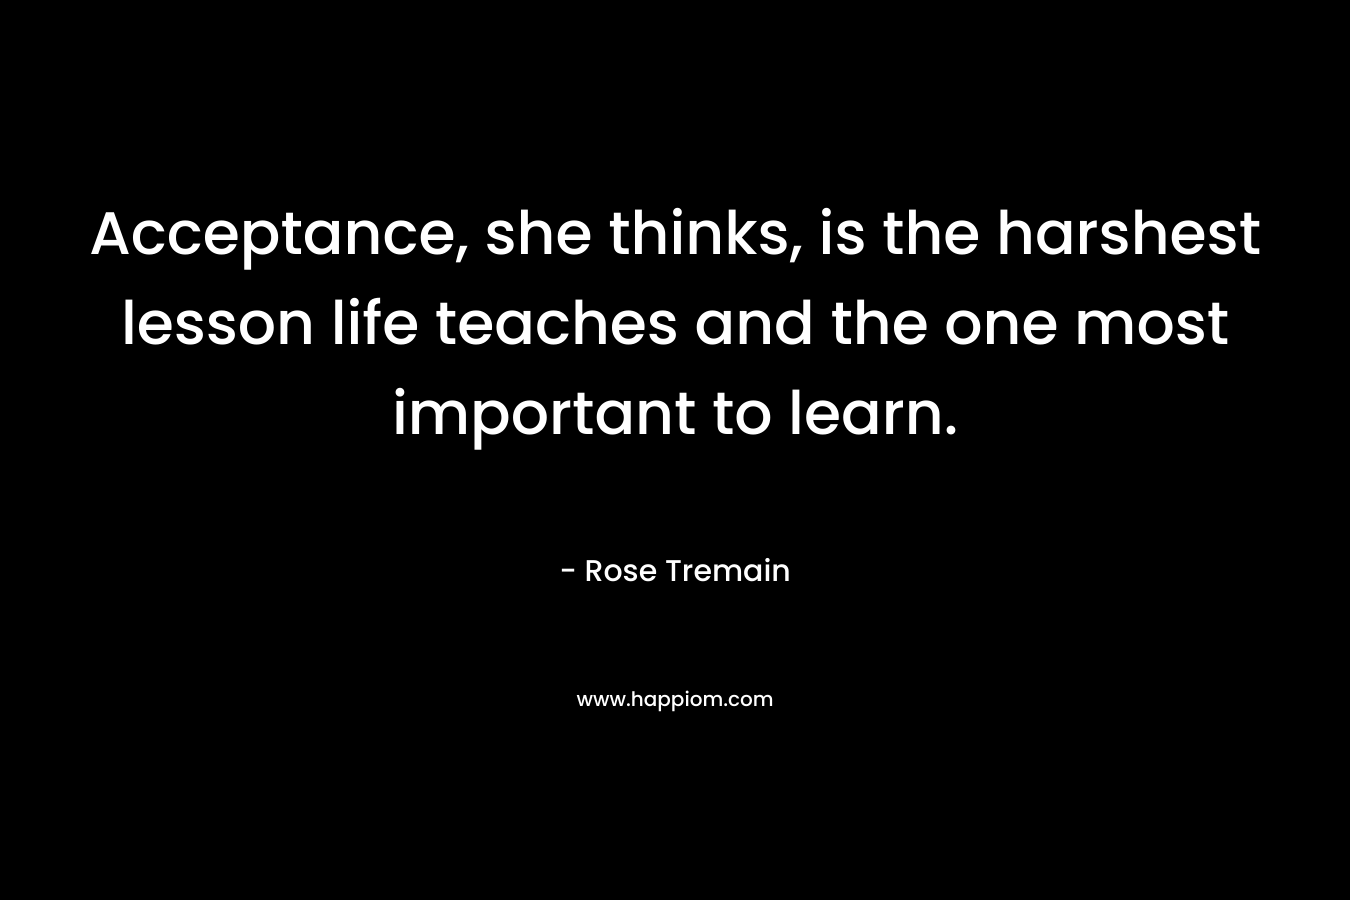 Acceptance, she thinks, is the harshest lesson life teaches and the one most important to learn.